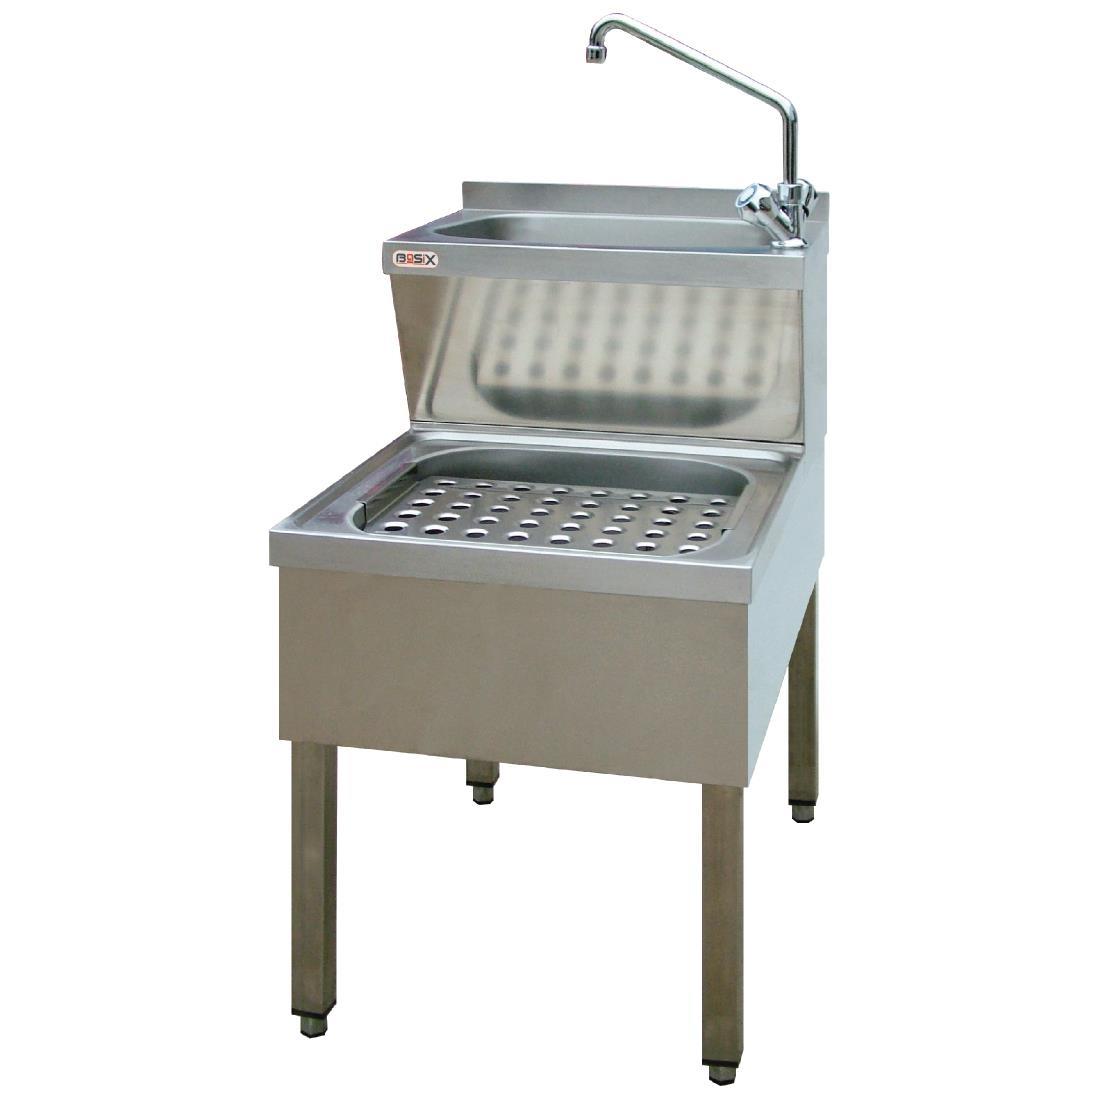 Basix Stainless Steel Janitorial Sink - CF115  - 1